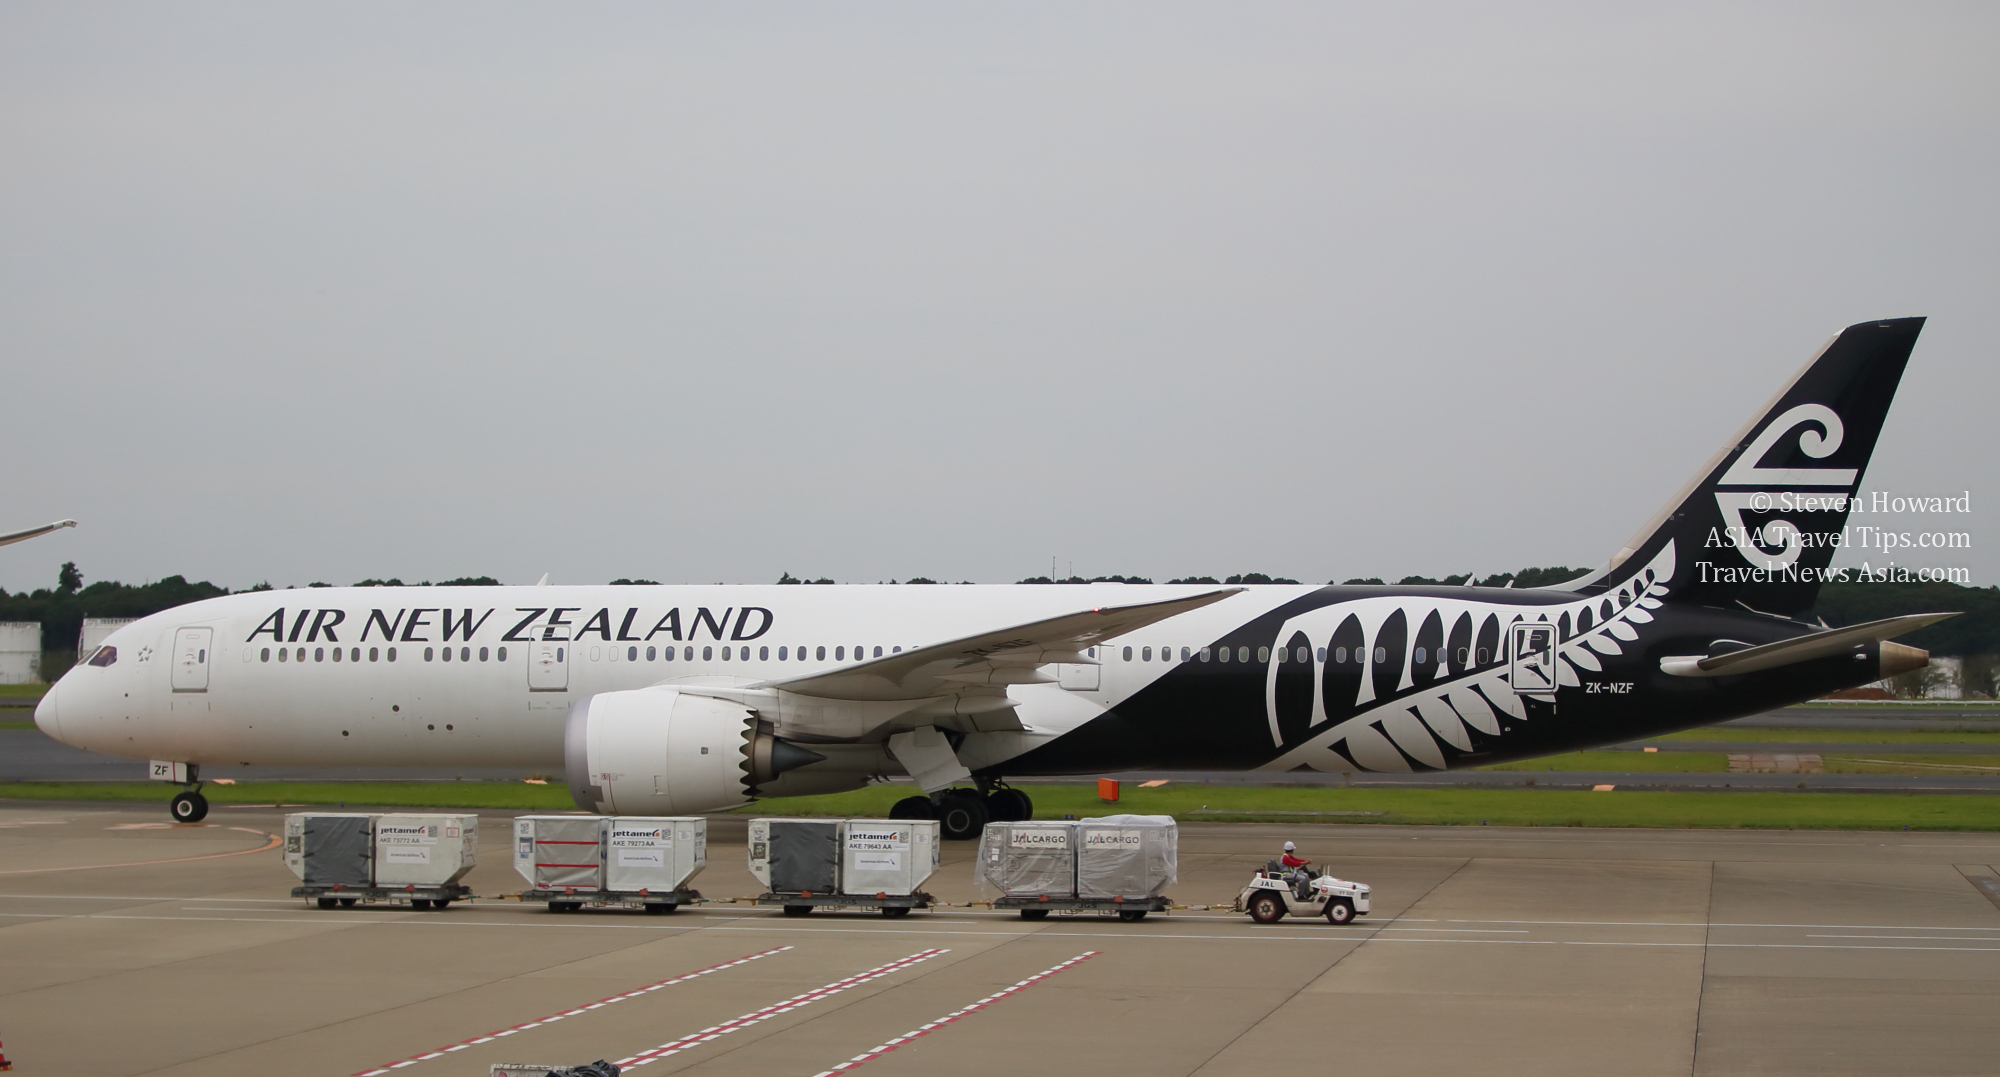 Air New Zealand Boeing 787-9. Picture by Steven Howard of TravelNewsAsia.com Click to enlarge.